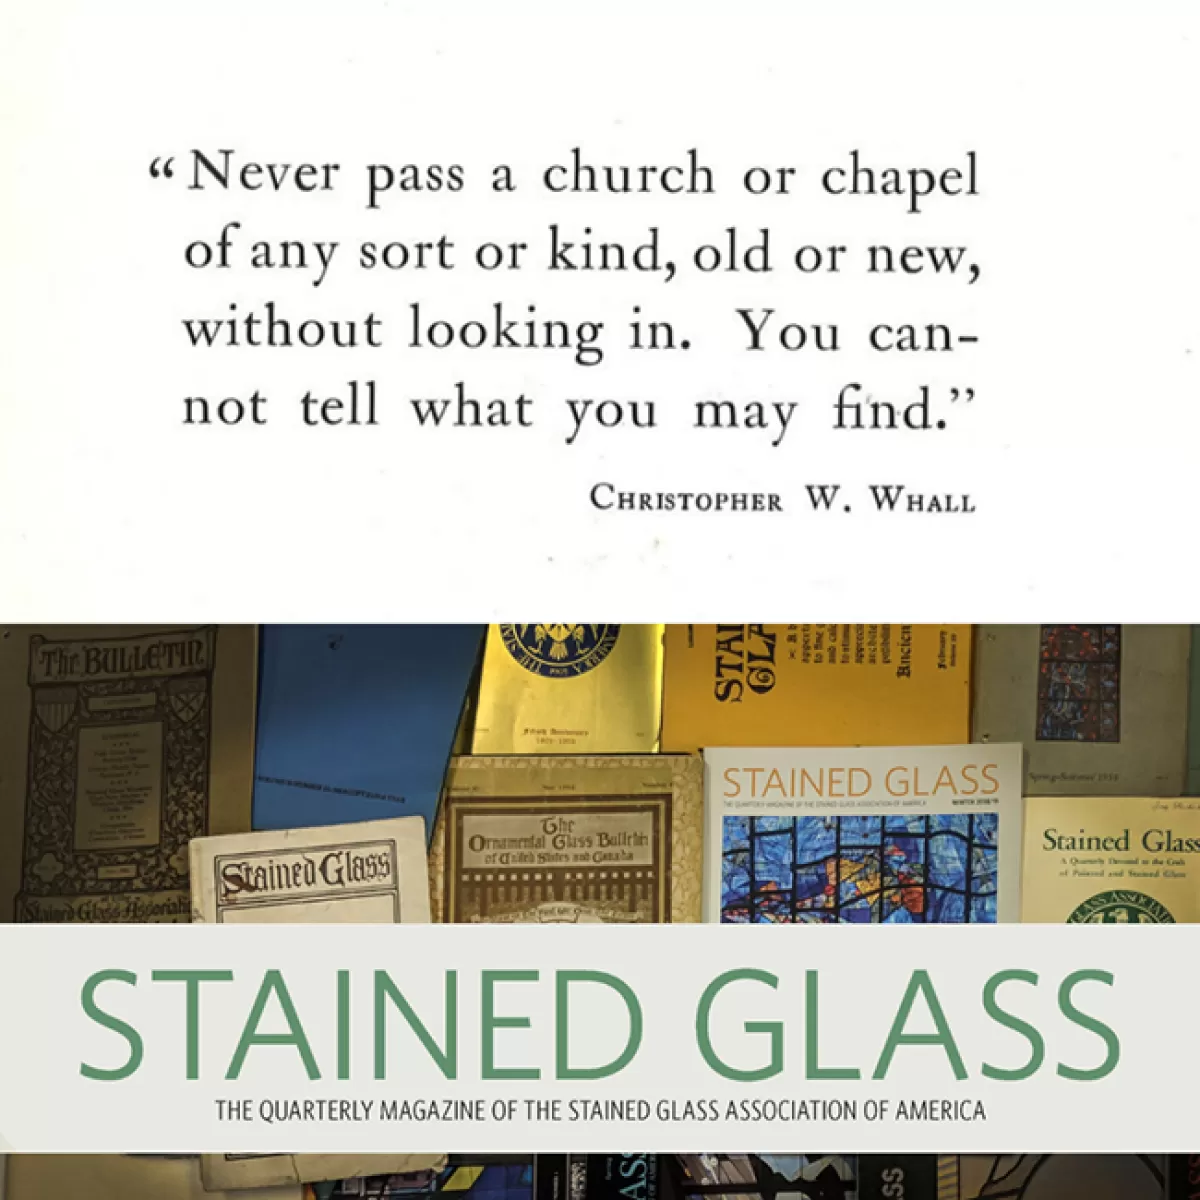 SGQ Covers and Whall Quote: Never pass a church or chapel of any sort or kind, old or new, without looking in. You cannot tell what you may find.